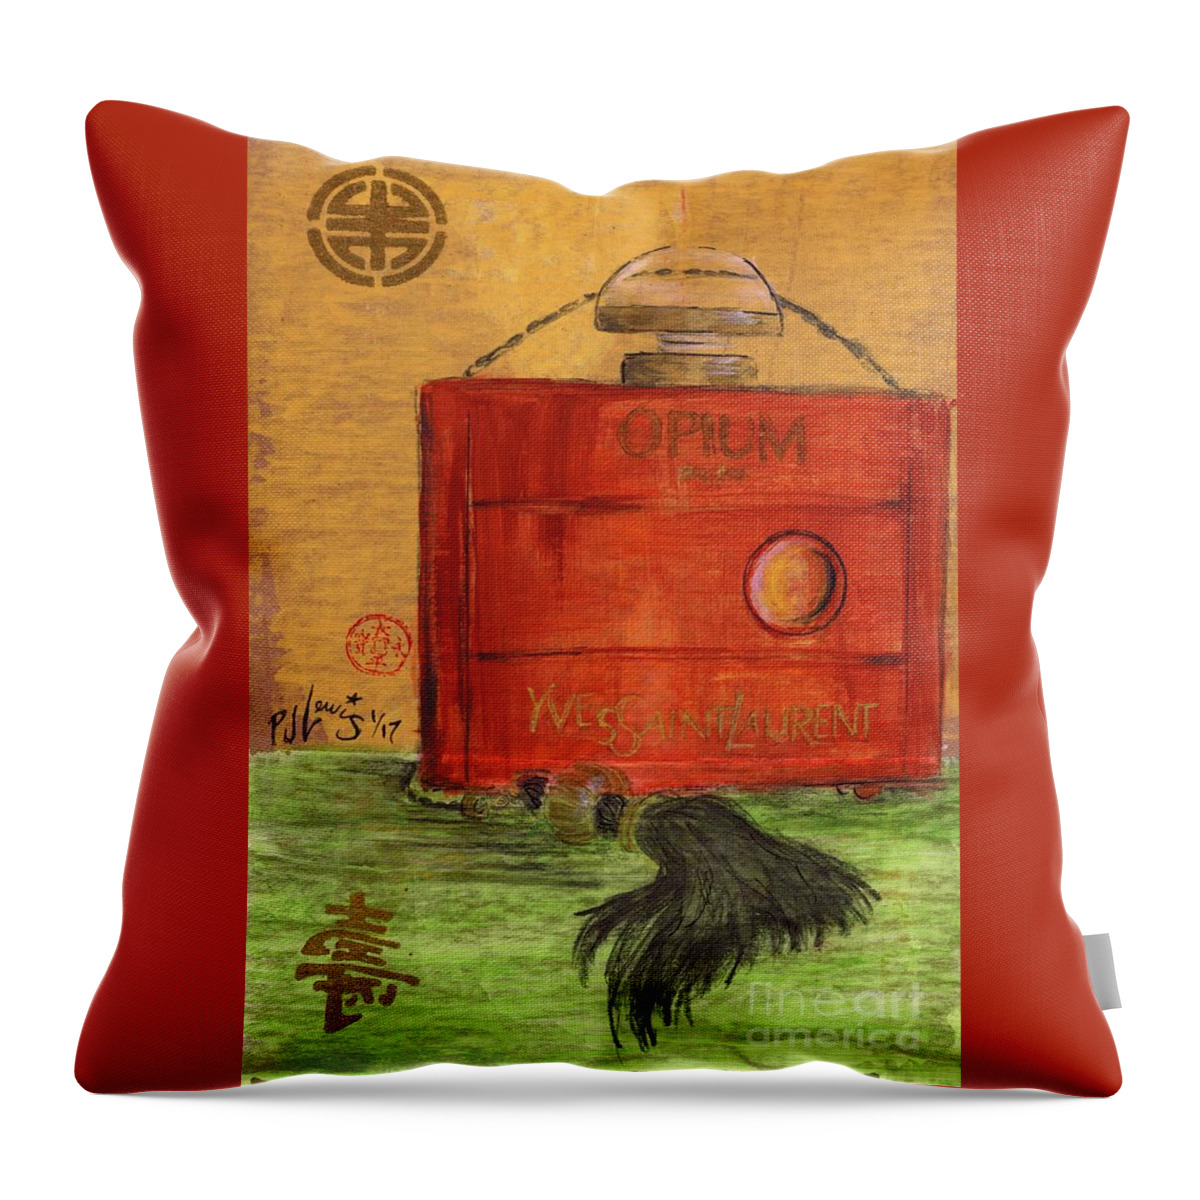 Opium Throw Pillow featuring the painting Opium by PJ Lewis